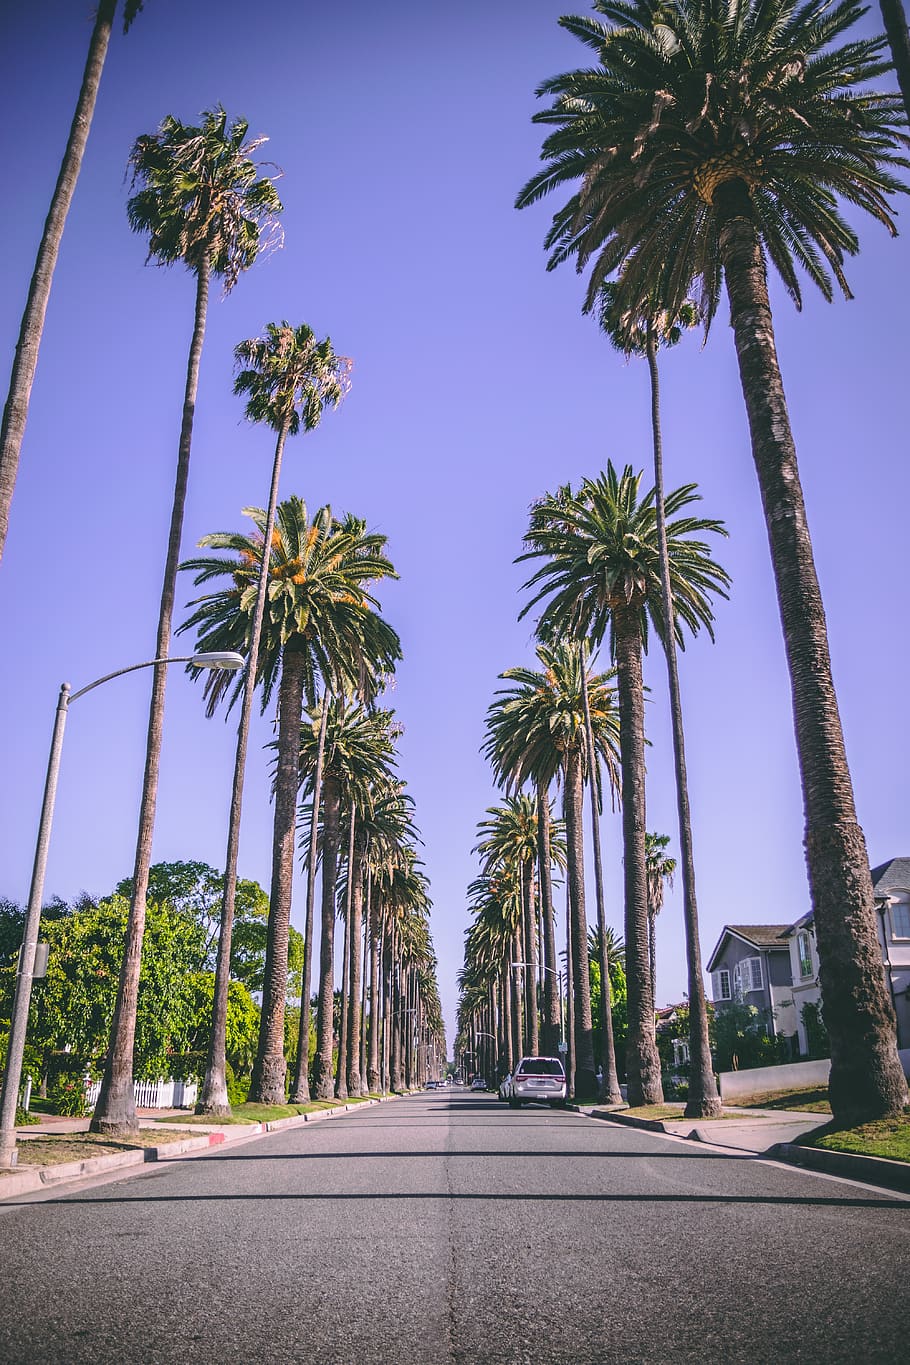 rodeo drive, united states, beverly hills, dope, cool, palm trees, HD wallpaper